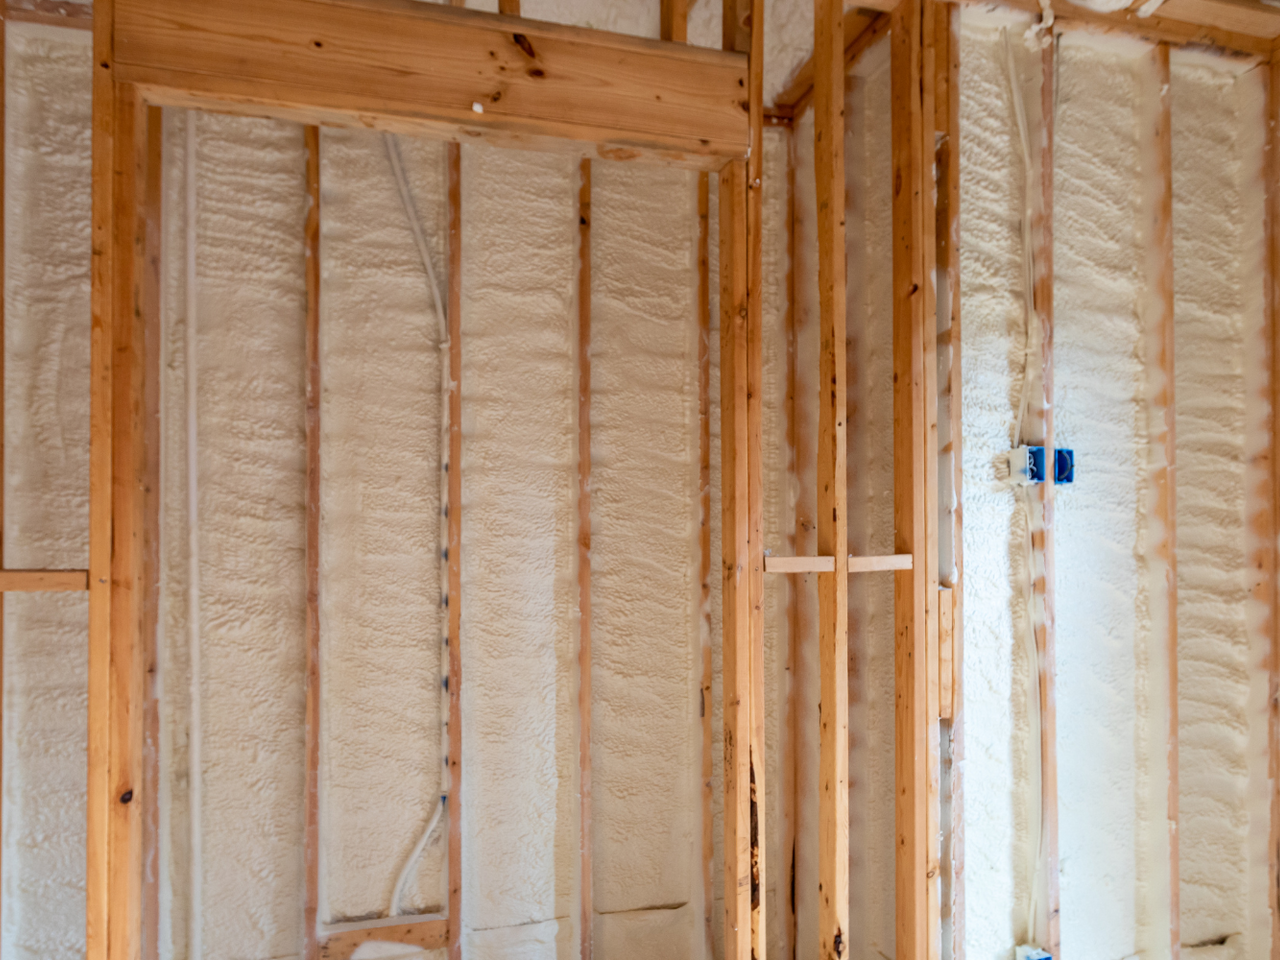 A room with wooden beams and foam insulation on the walls.